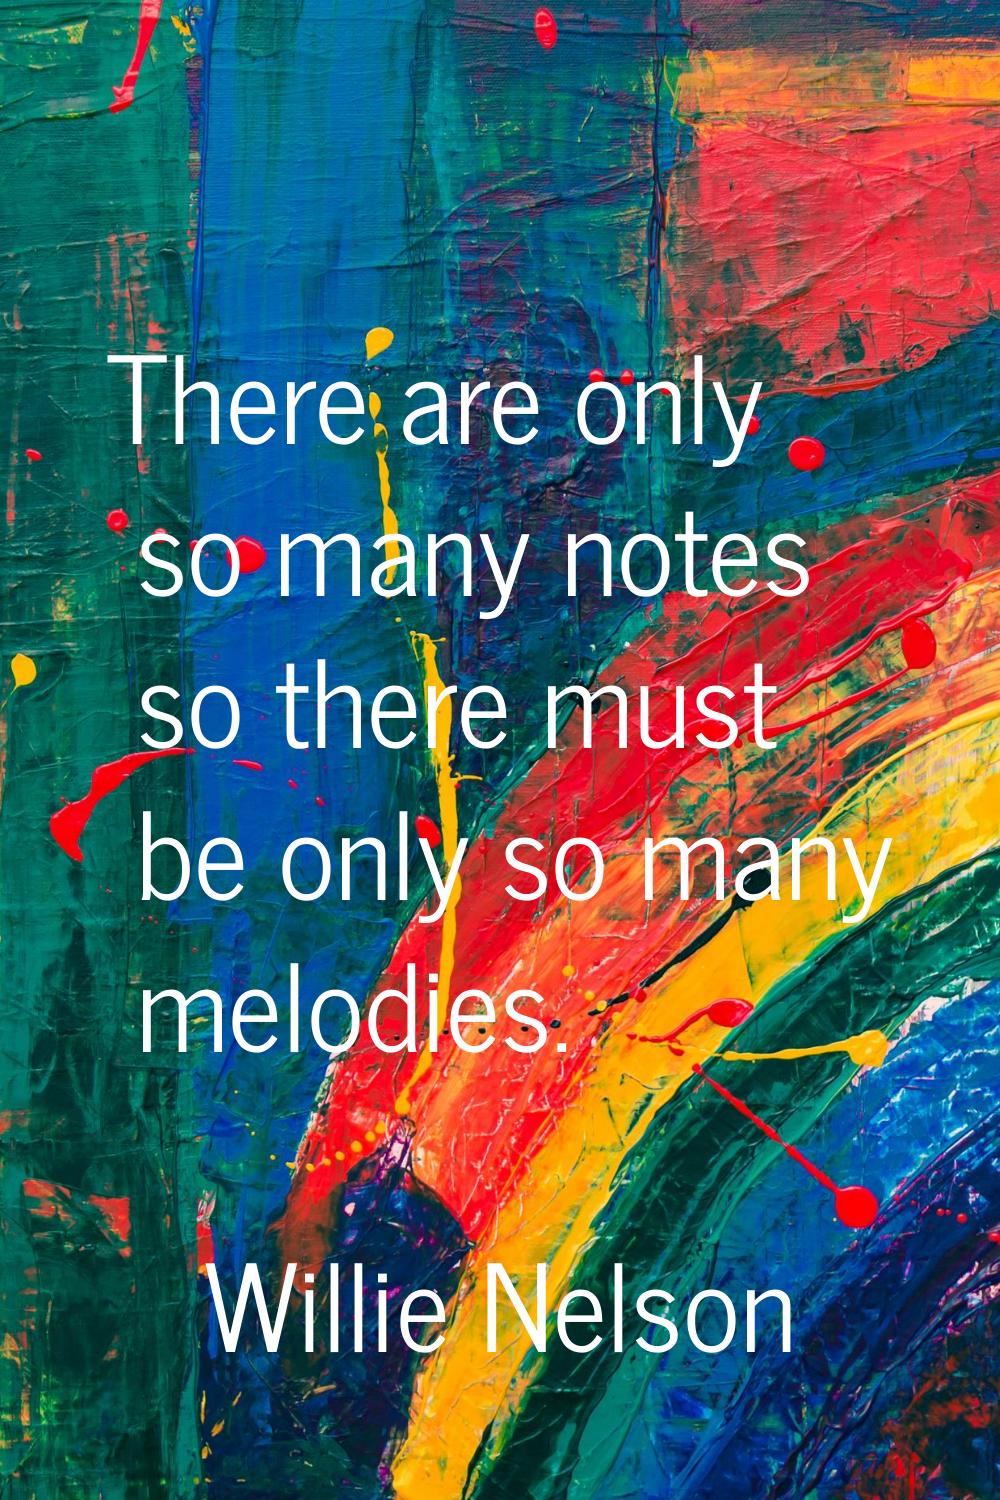 There are only so many notes so there must be only so many melodies.